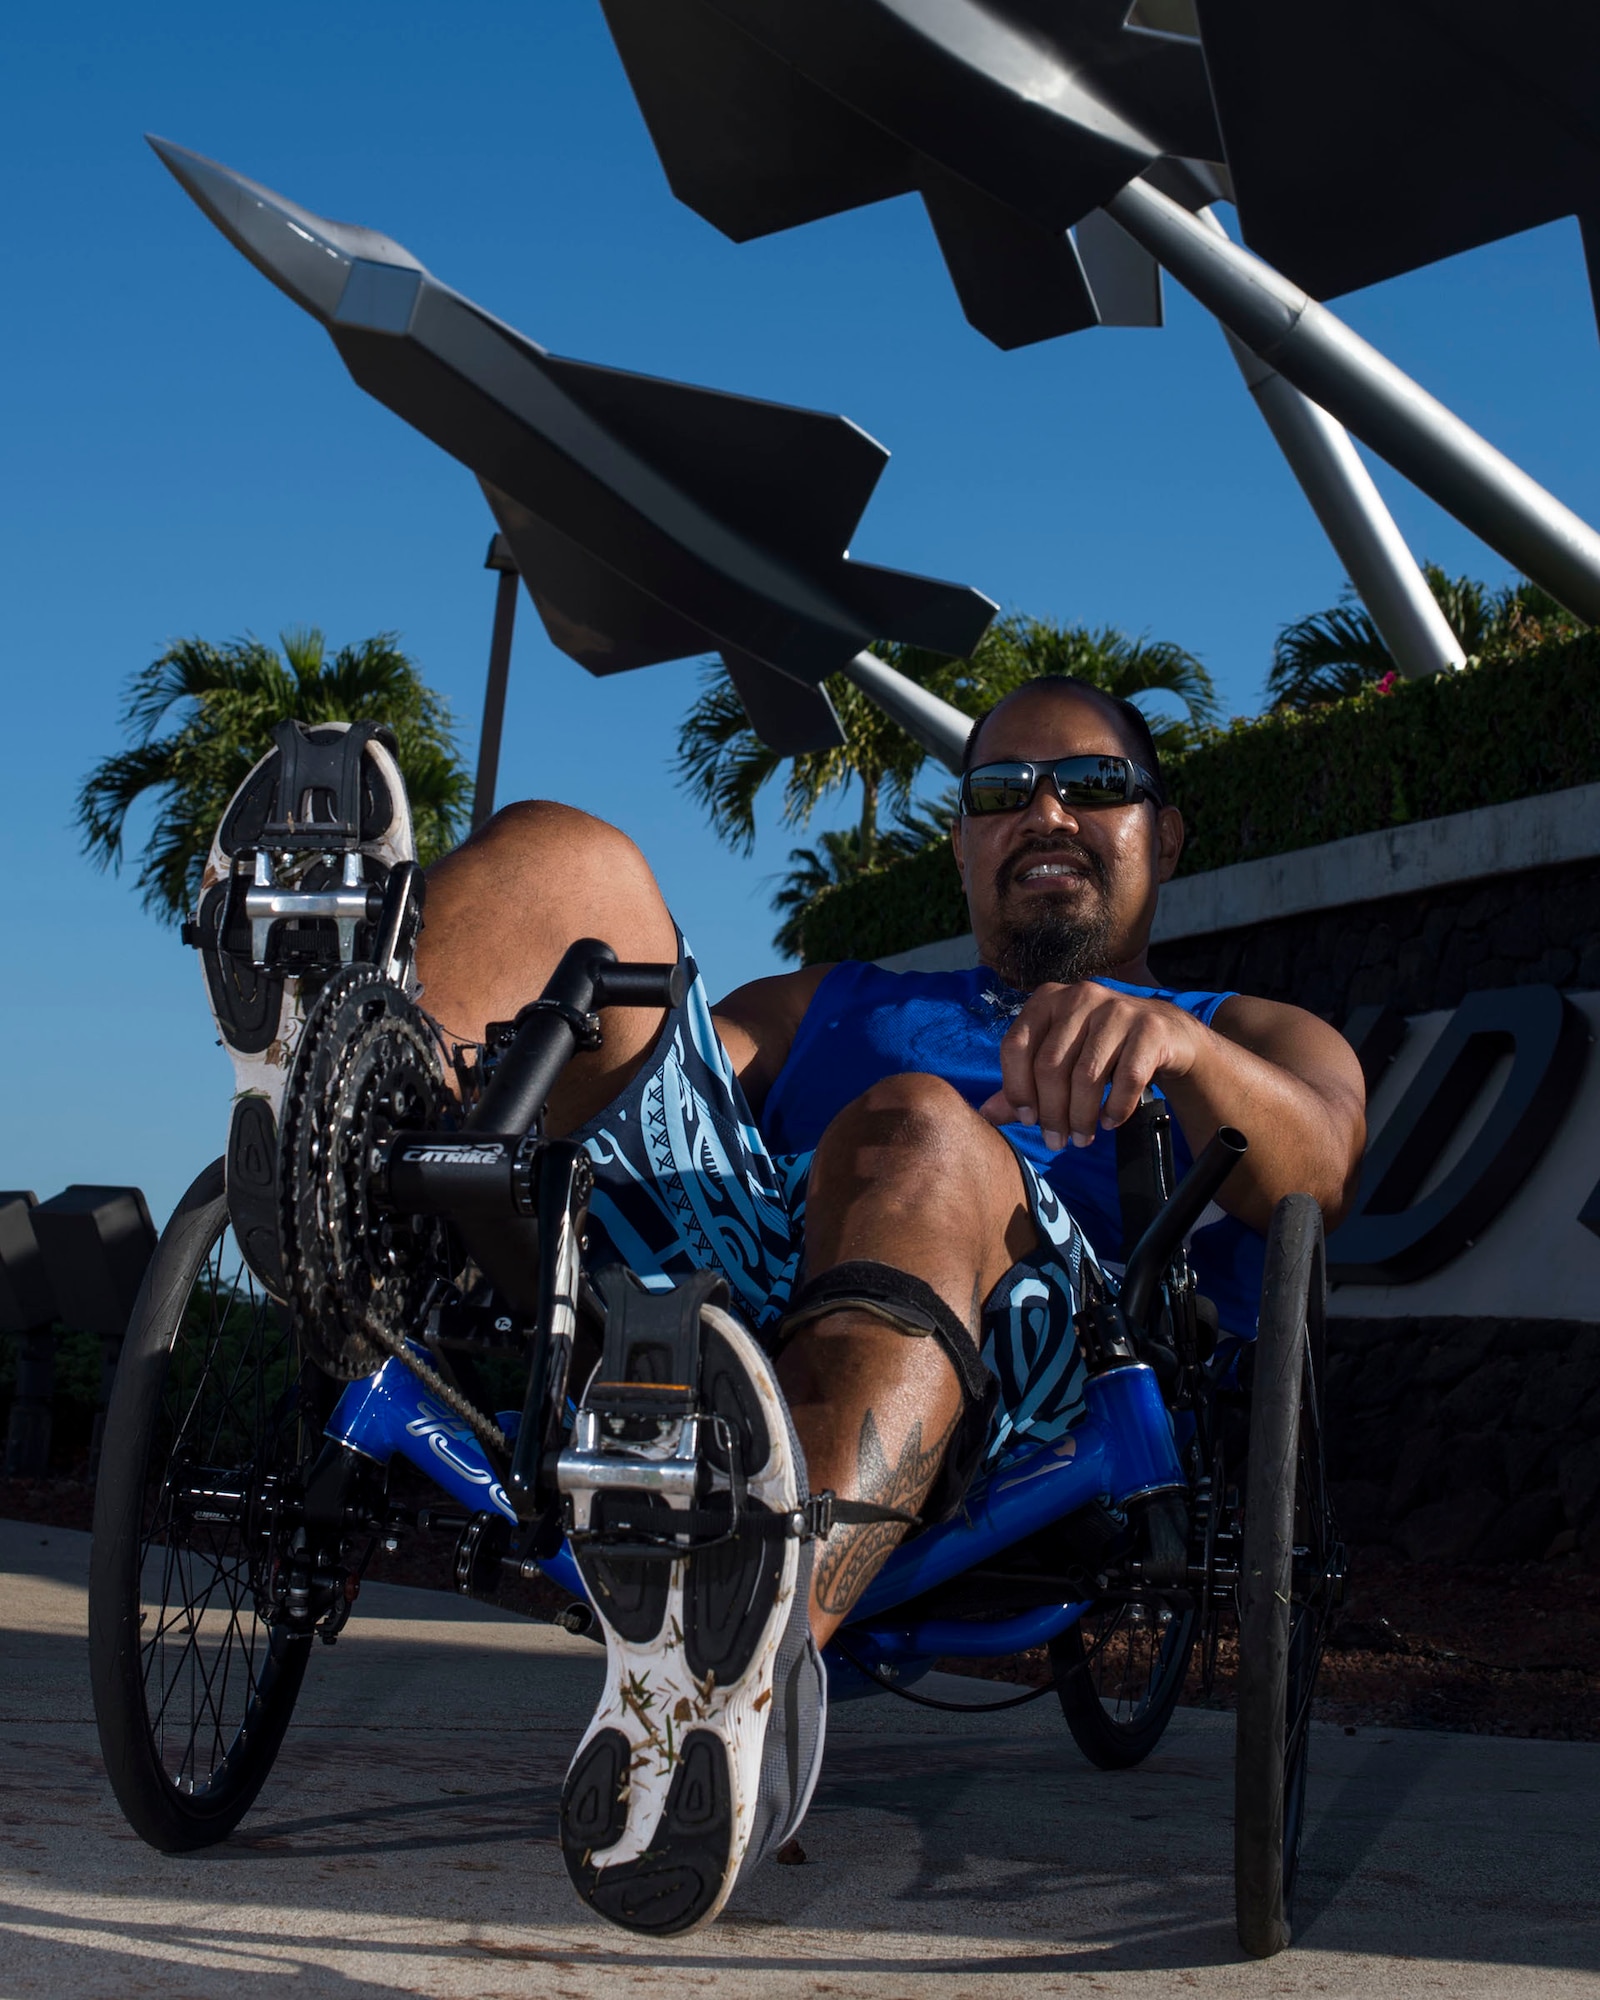 Retired Chief Master Sgt. Garrett Kuwada, originally from Honolulu, Hawaii, poses with his recumbent bike, which is one of the sports he will be participating in during the 2019 Wounded Warrior Games. Kuwada had a ruptured brain aneurysm resulting in blood around his brain and damage to his spinal cord and legs. He now suffers loss of coordination and balance, hearing, vision, speech and cognitive function. (U.S. Air Force photo by Tech. Sgt. Heather Redman)